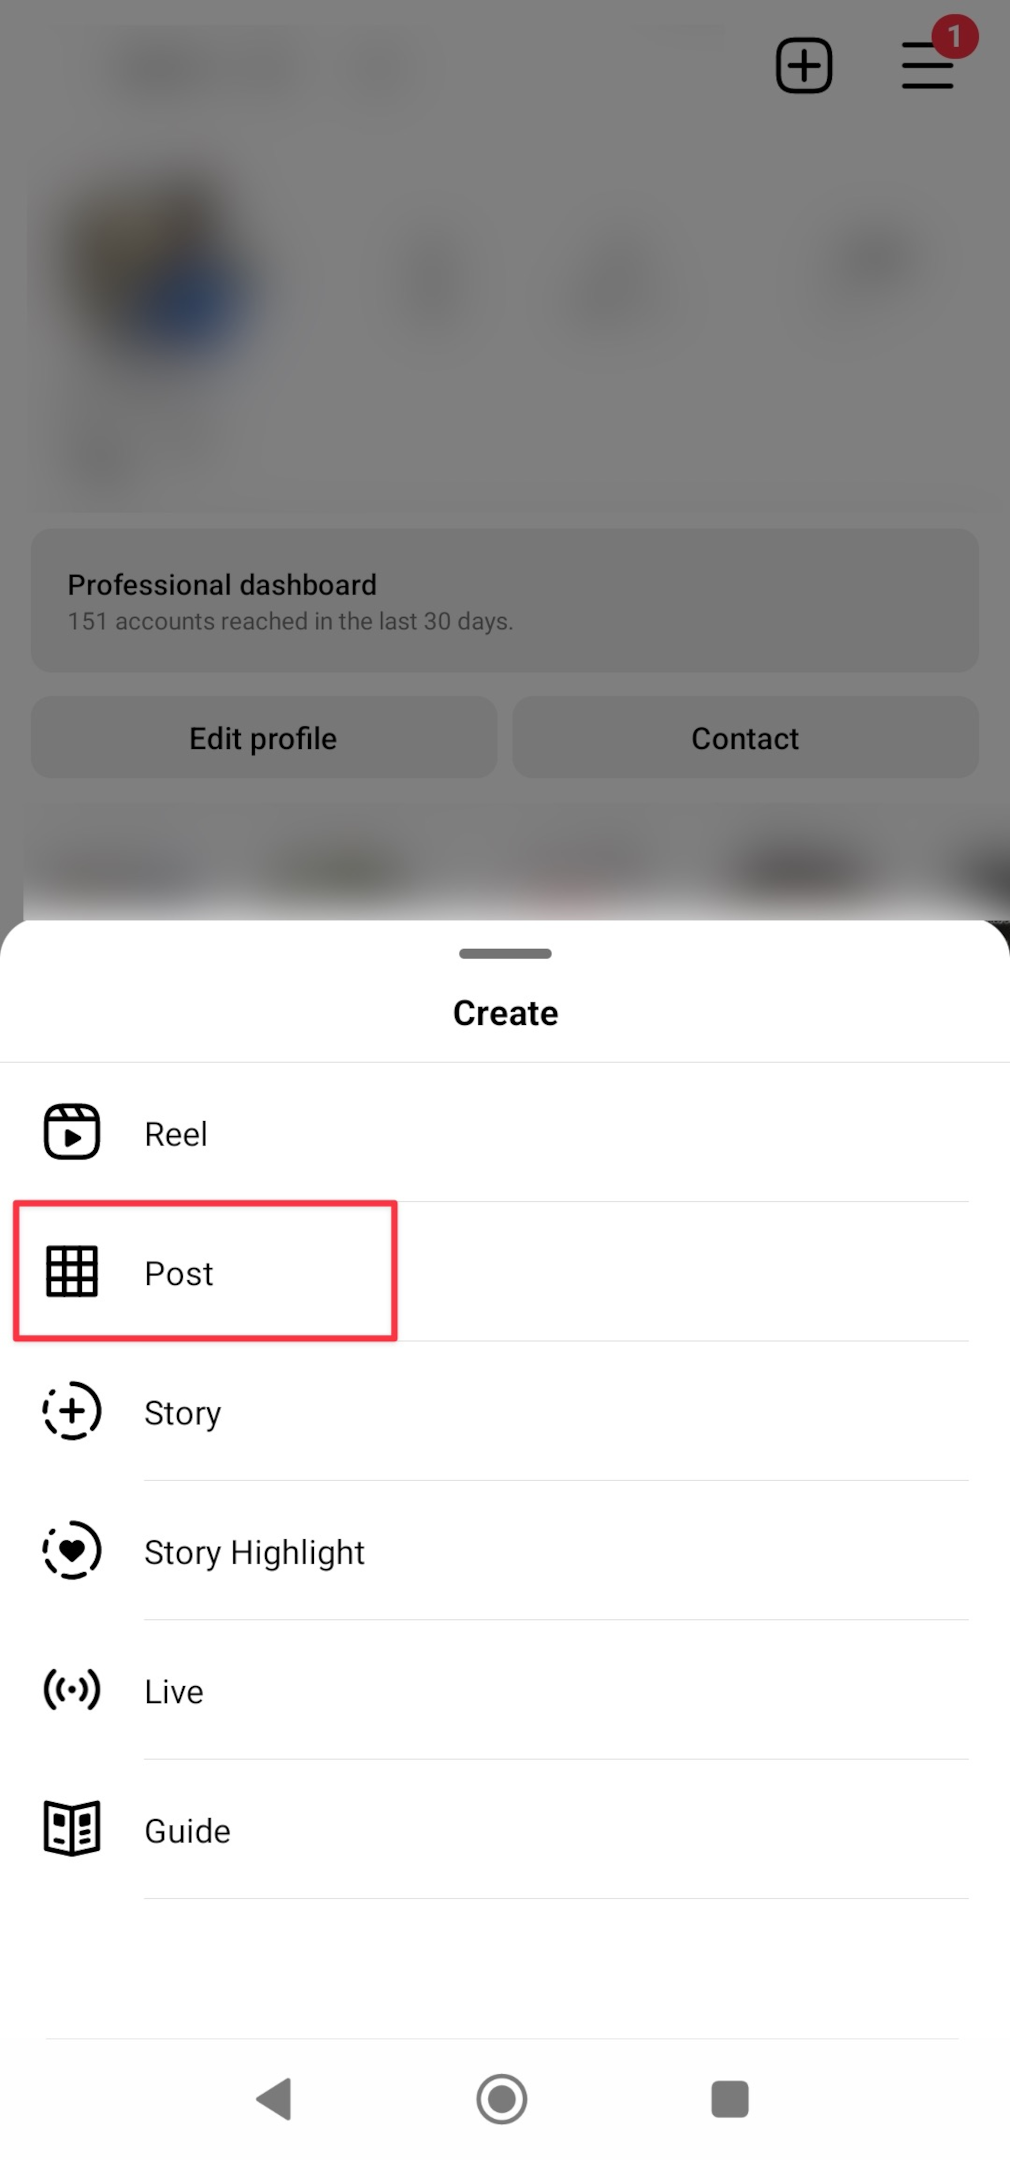 Remote.tools shows how to post content on Instagram from Instagram profile